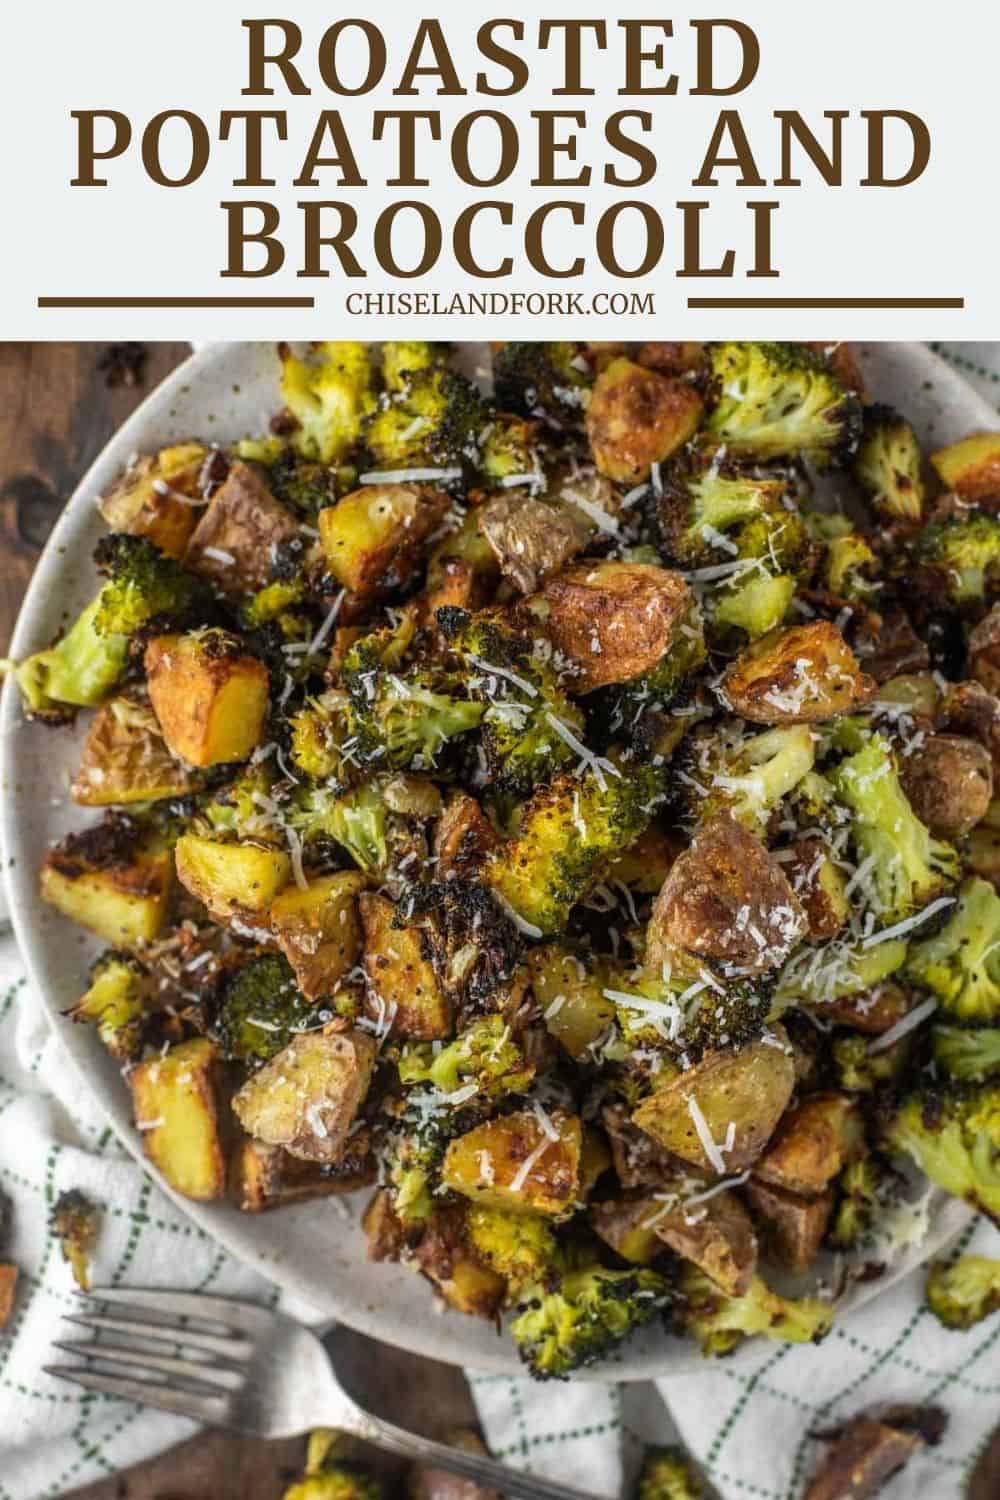 Roasted Potatoes and Broccoli - Chisel & Fork